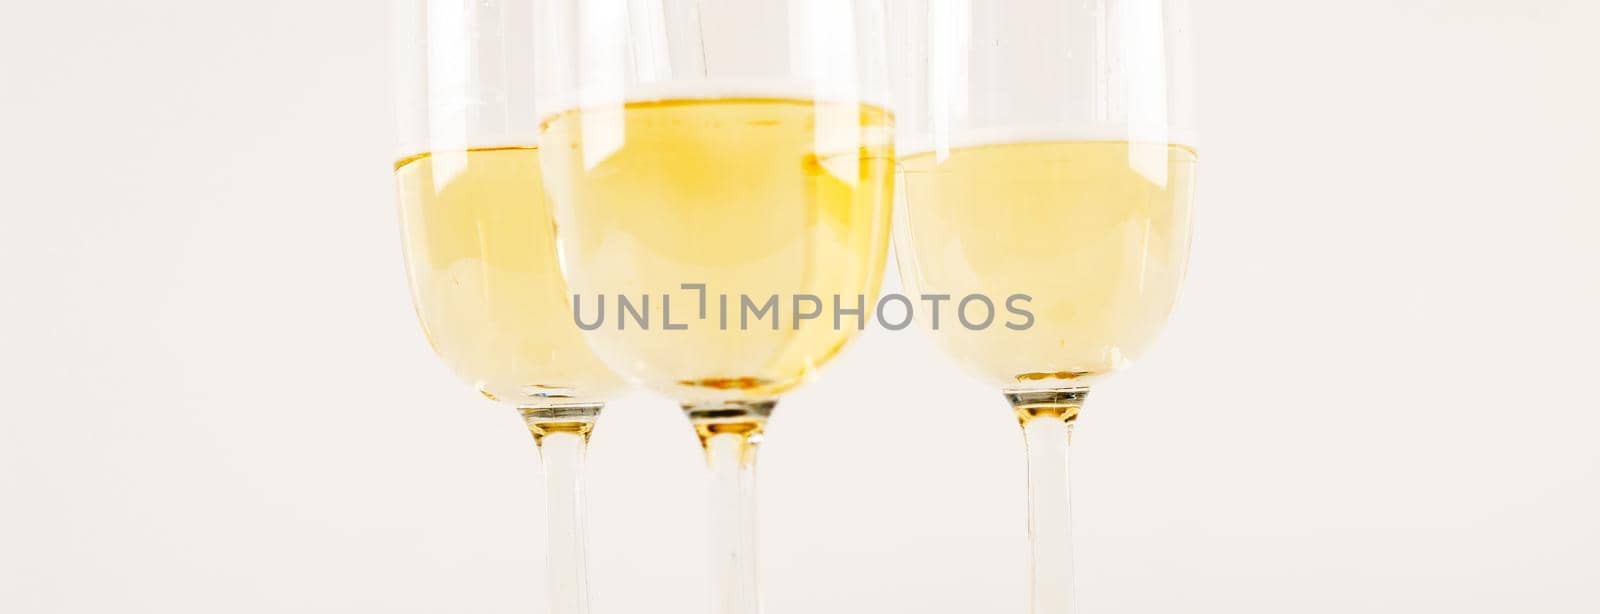 luxurious champagne in a glass, festive way of celebrating a new year or important events, toast with sparkling wine by Q77photo